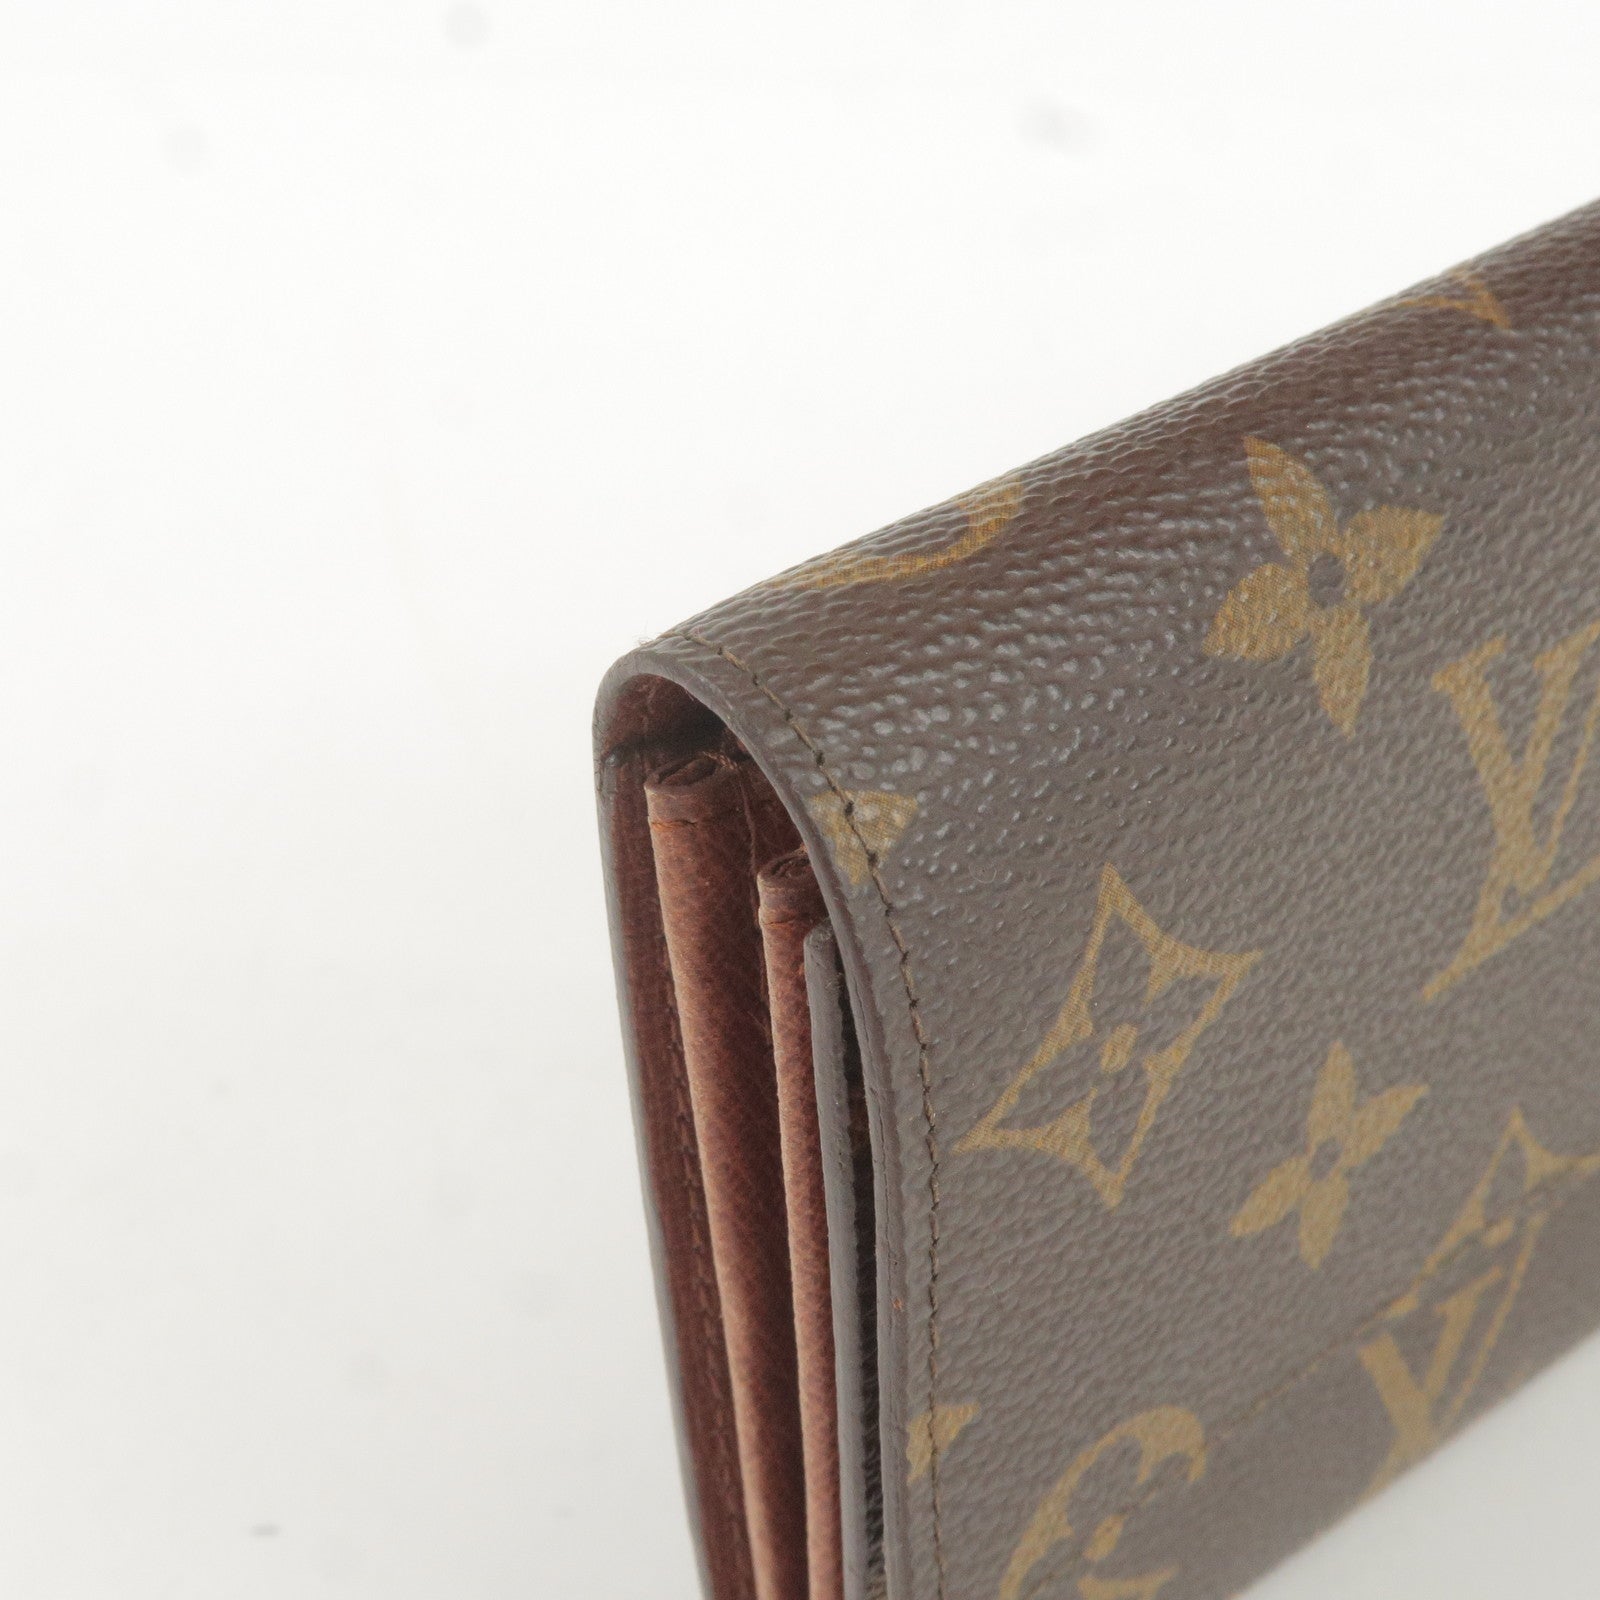 Louis Vuitton Portefeuille Leather Wallet (pre-owned) in Natural